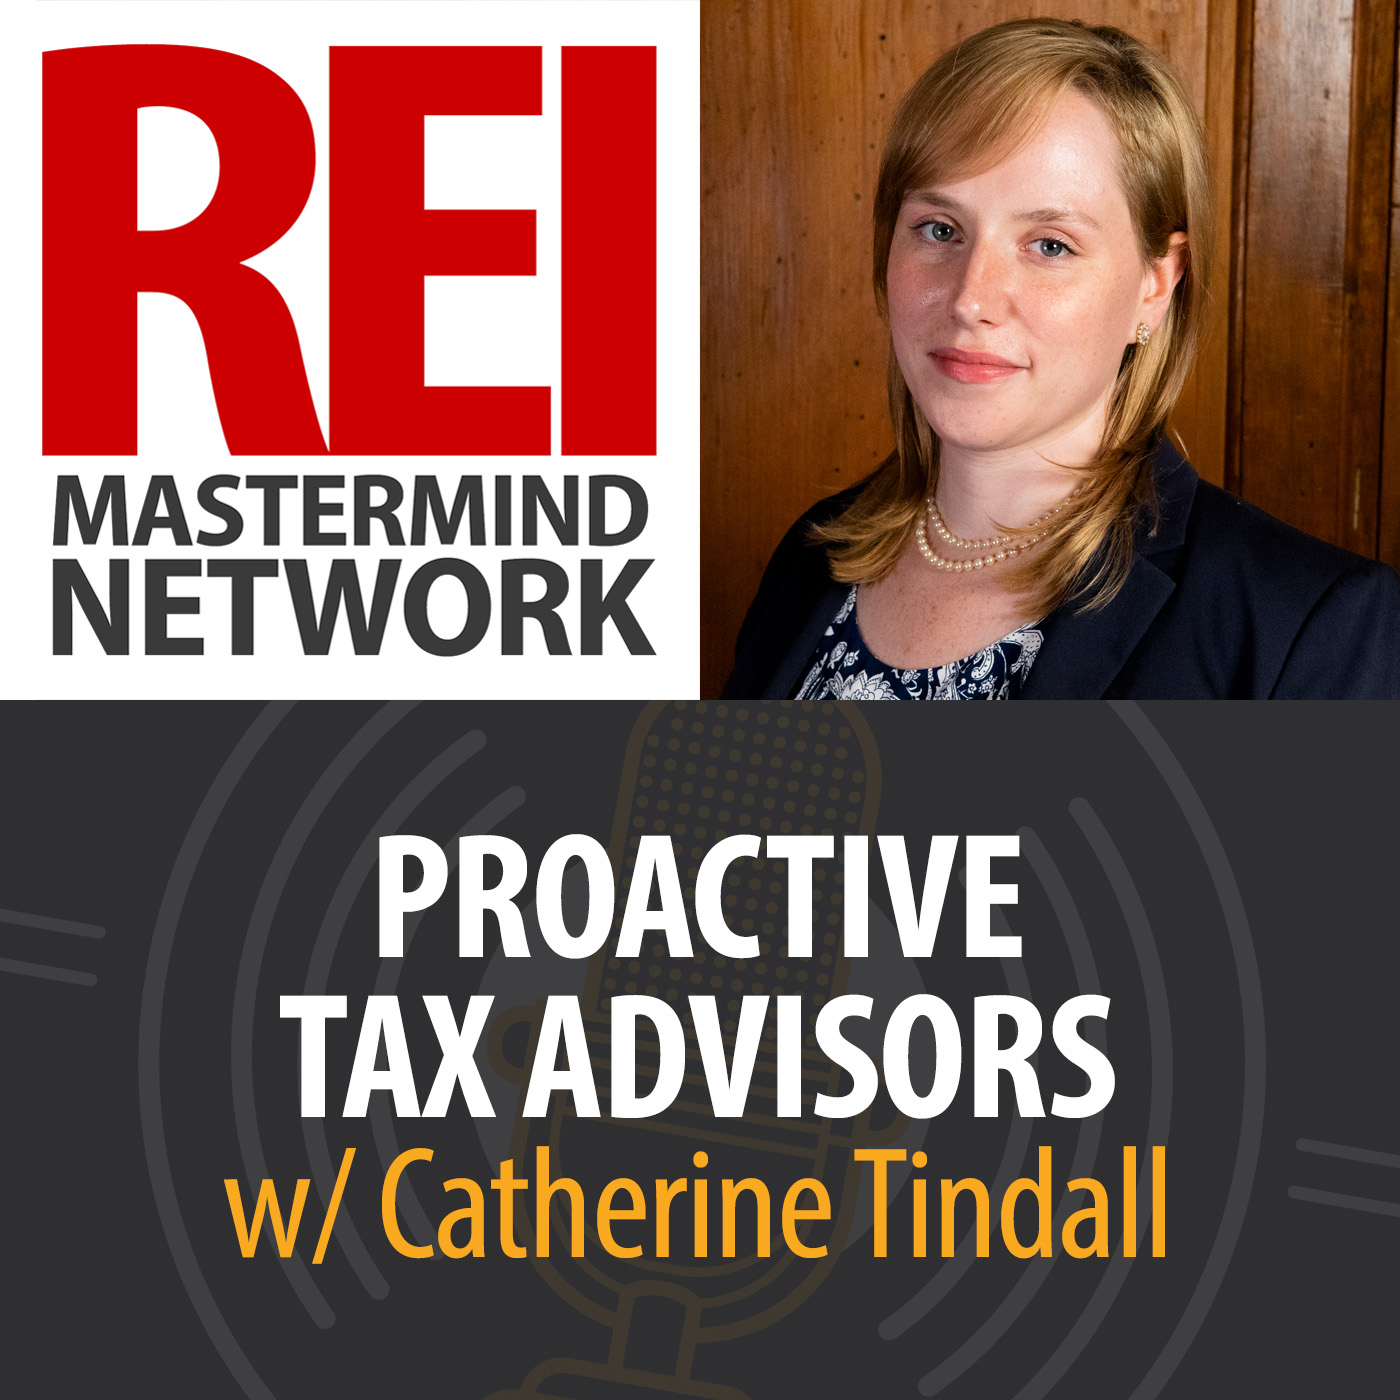 Proactive Tax Advisors with Catherine Tindall Image